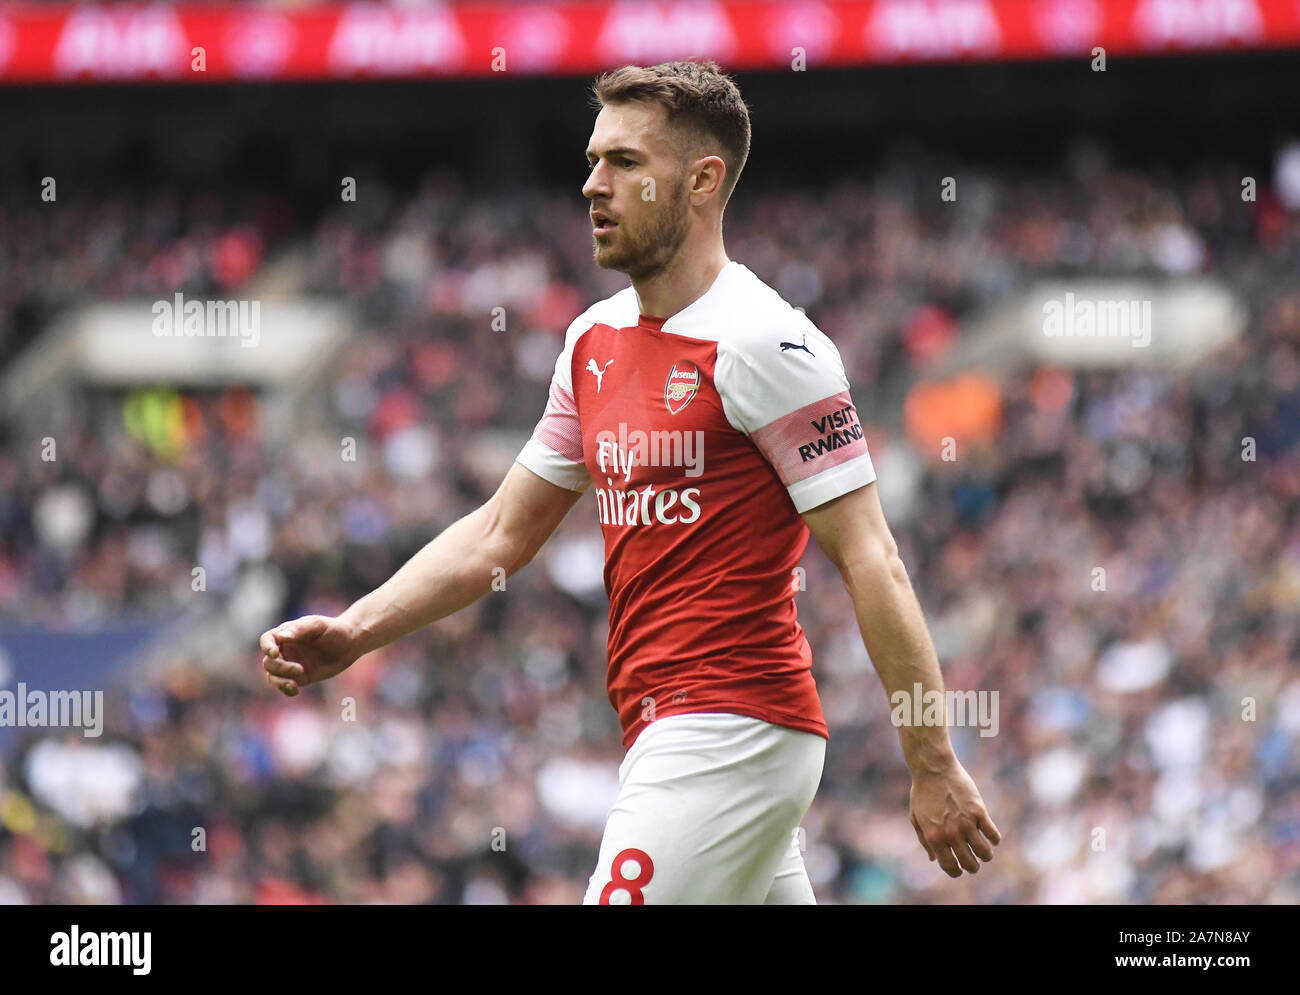 LONDON, ENGLAND - MARCH 2, 2019: Aaron Ramsey of Arsenal pictured during the 2018/19 Premier League game between Tottenham Hotspur and Arsenal FC at Wembley Stadium. Stock Photo